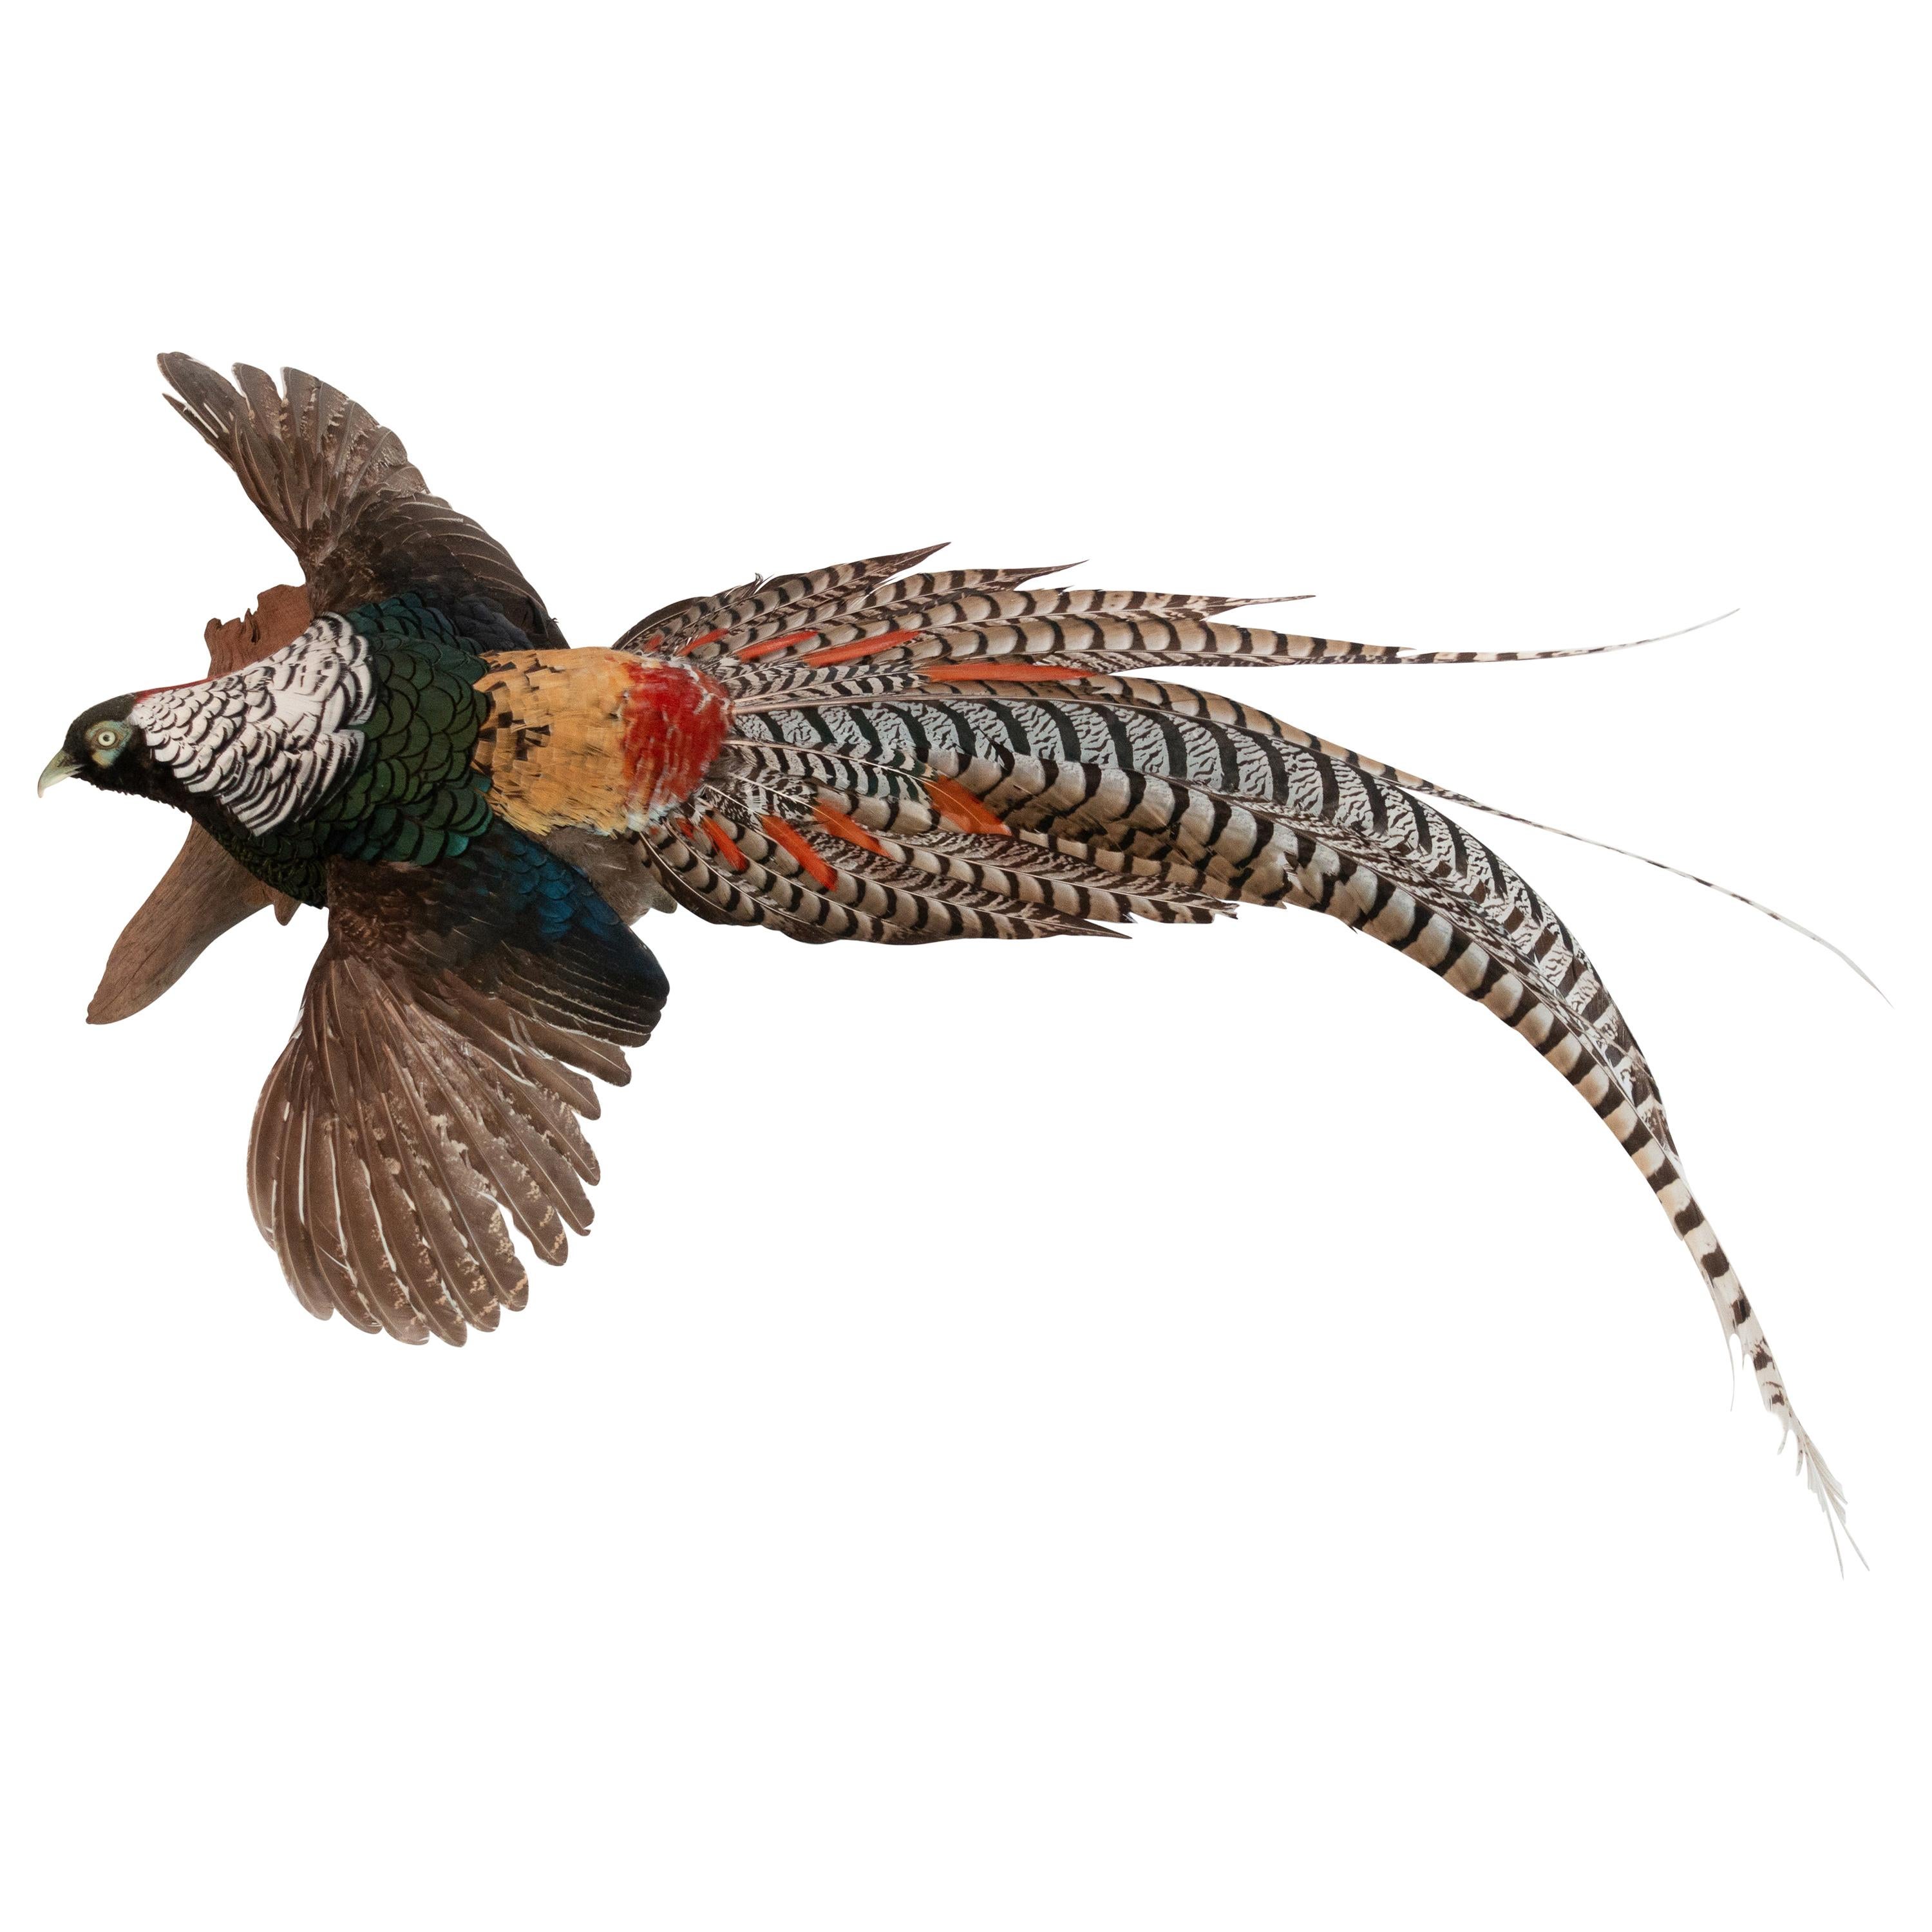 Lady Amherst Pheasant Wall Mounted Taxidermy Specimen